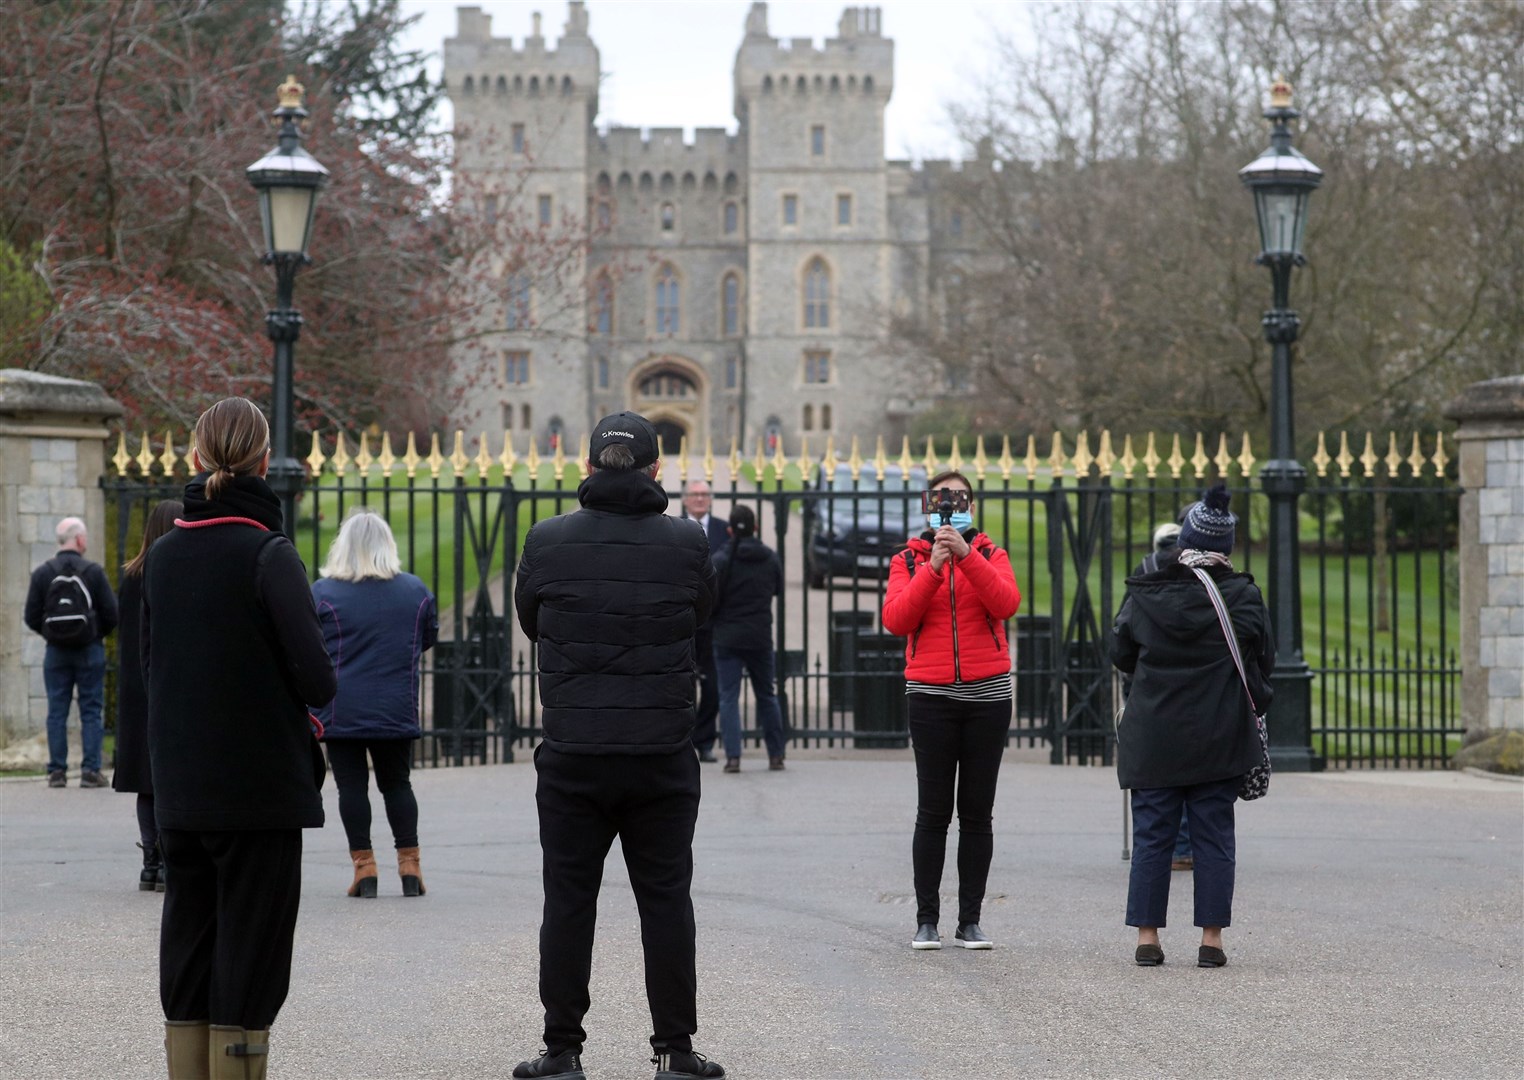 People gathered outside Windsor Castle on Saturday (Steve Parsons/PA)